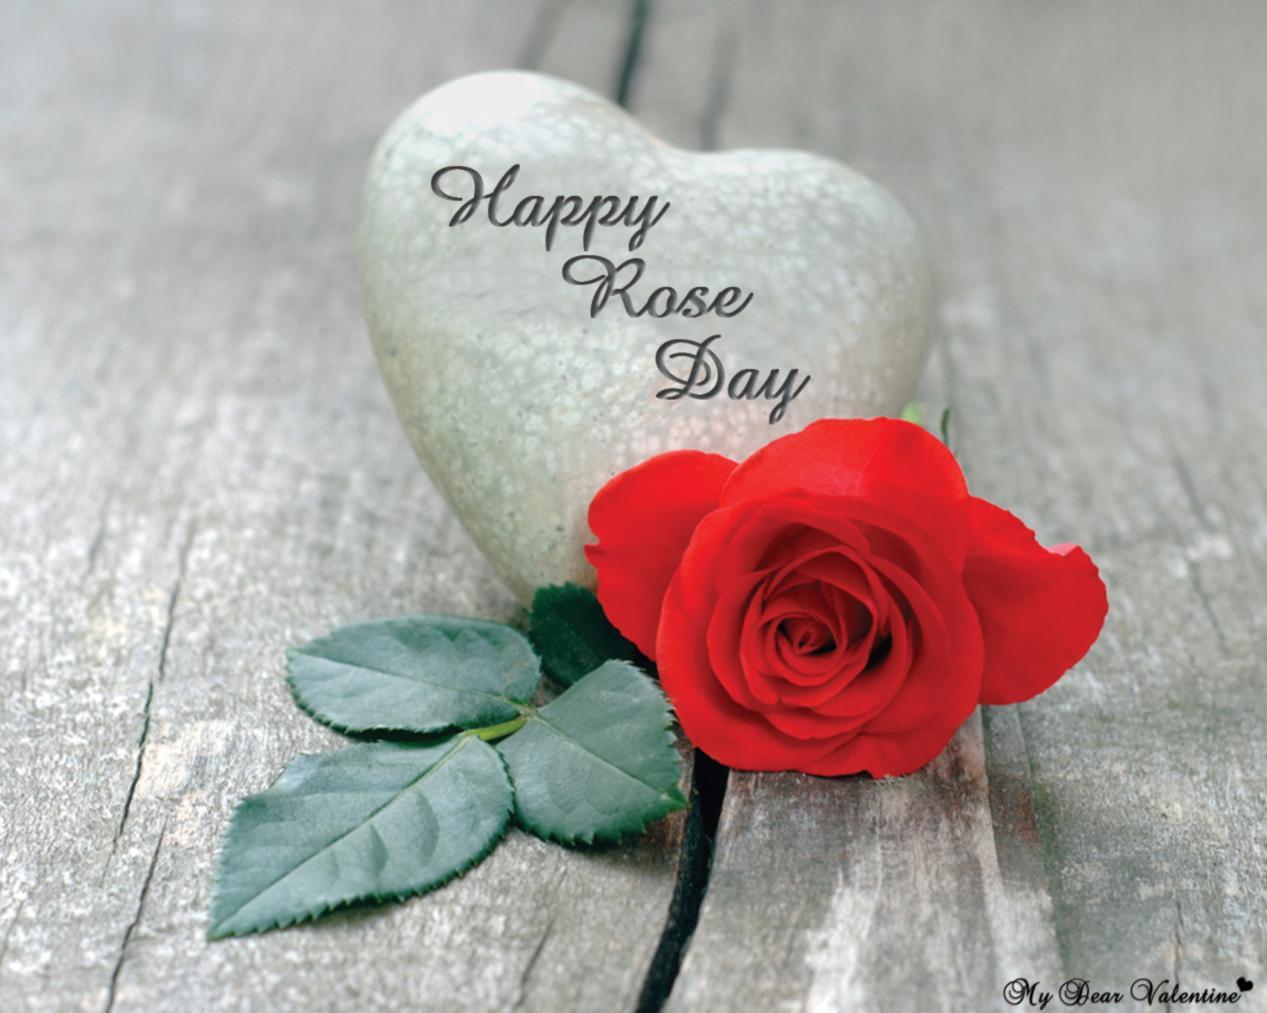 Rose Day Pics (HD Image), Status & Funny Roses are Red Poems